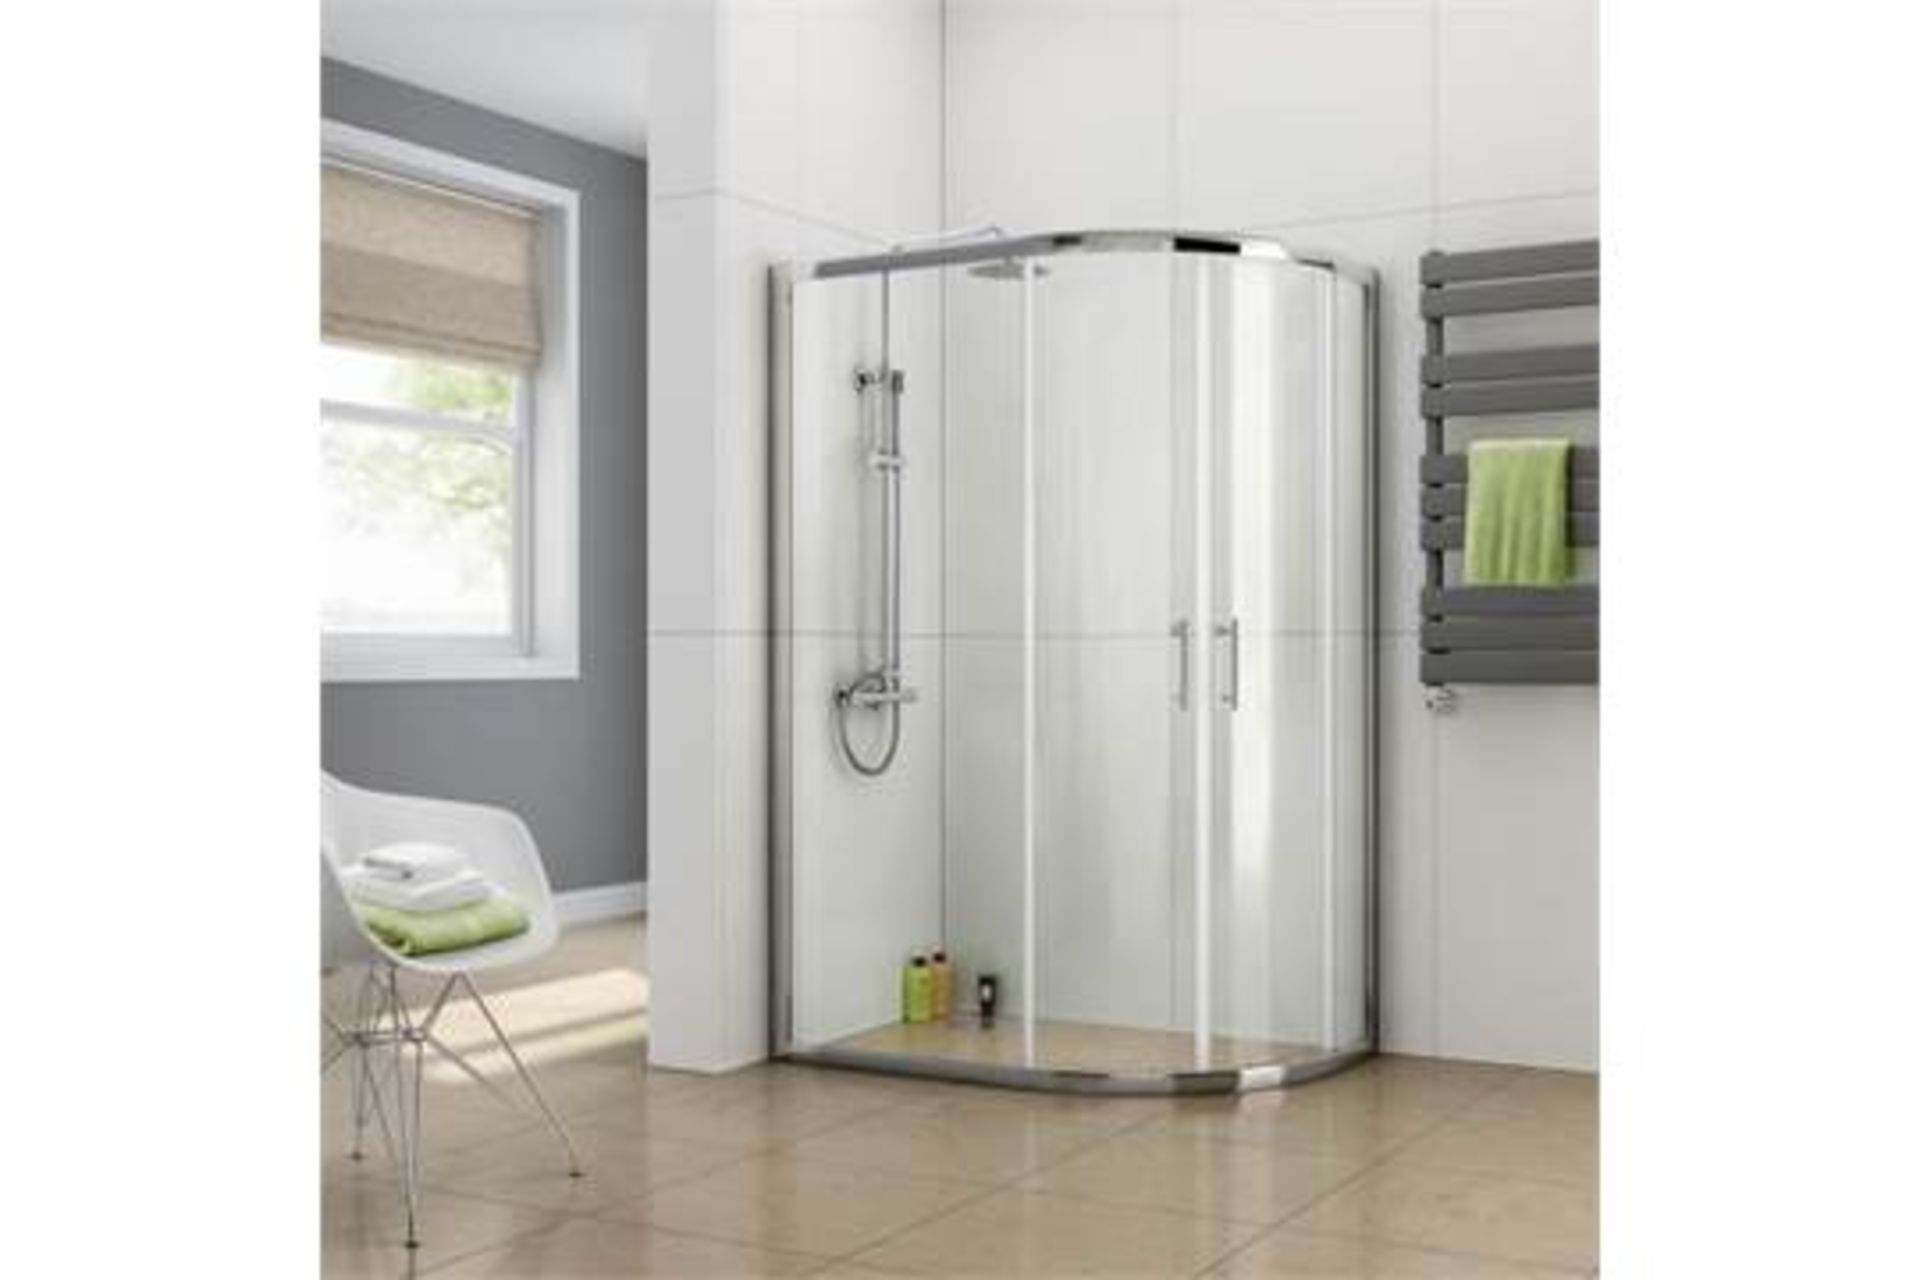 (A16) 760x900mm - 6mm - Elements Offset Quadrant Shower Enclosure. RRP £323.99. Featuring a gentle - Image 5 of 5